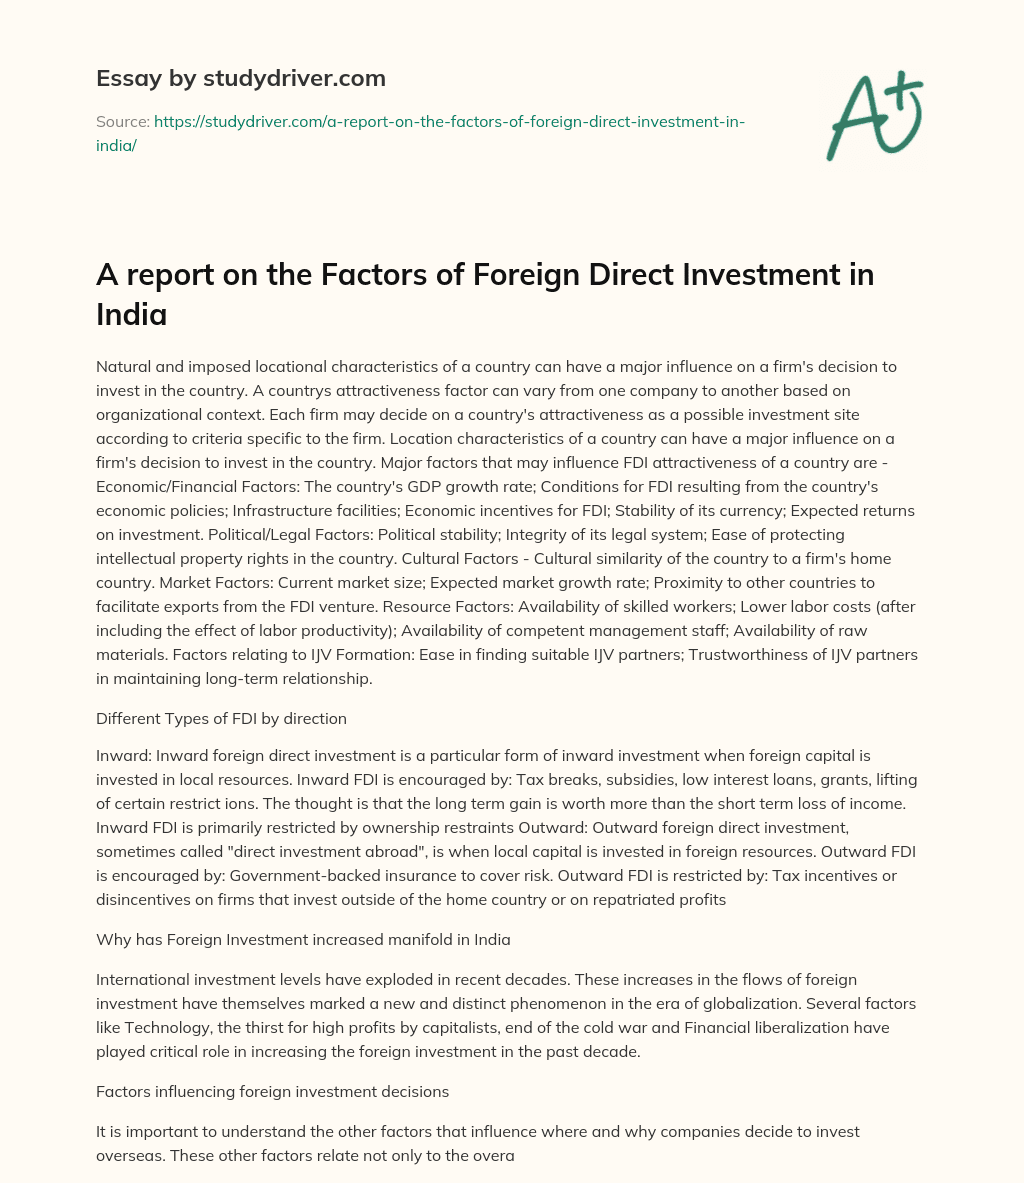 A Report on the Factors of Foreign Direct Investment in India essay